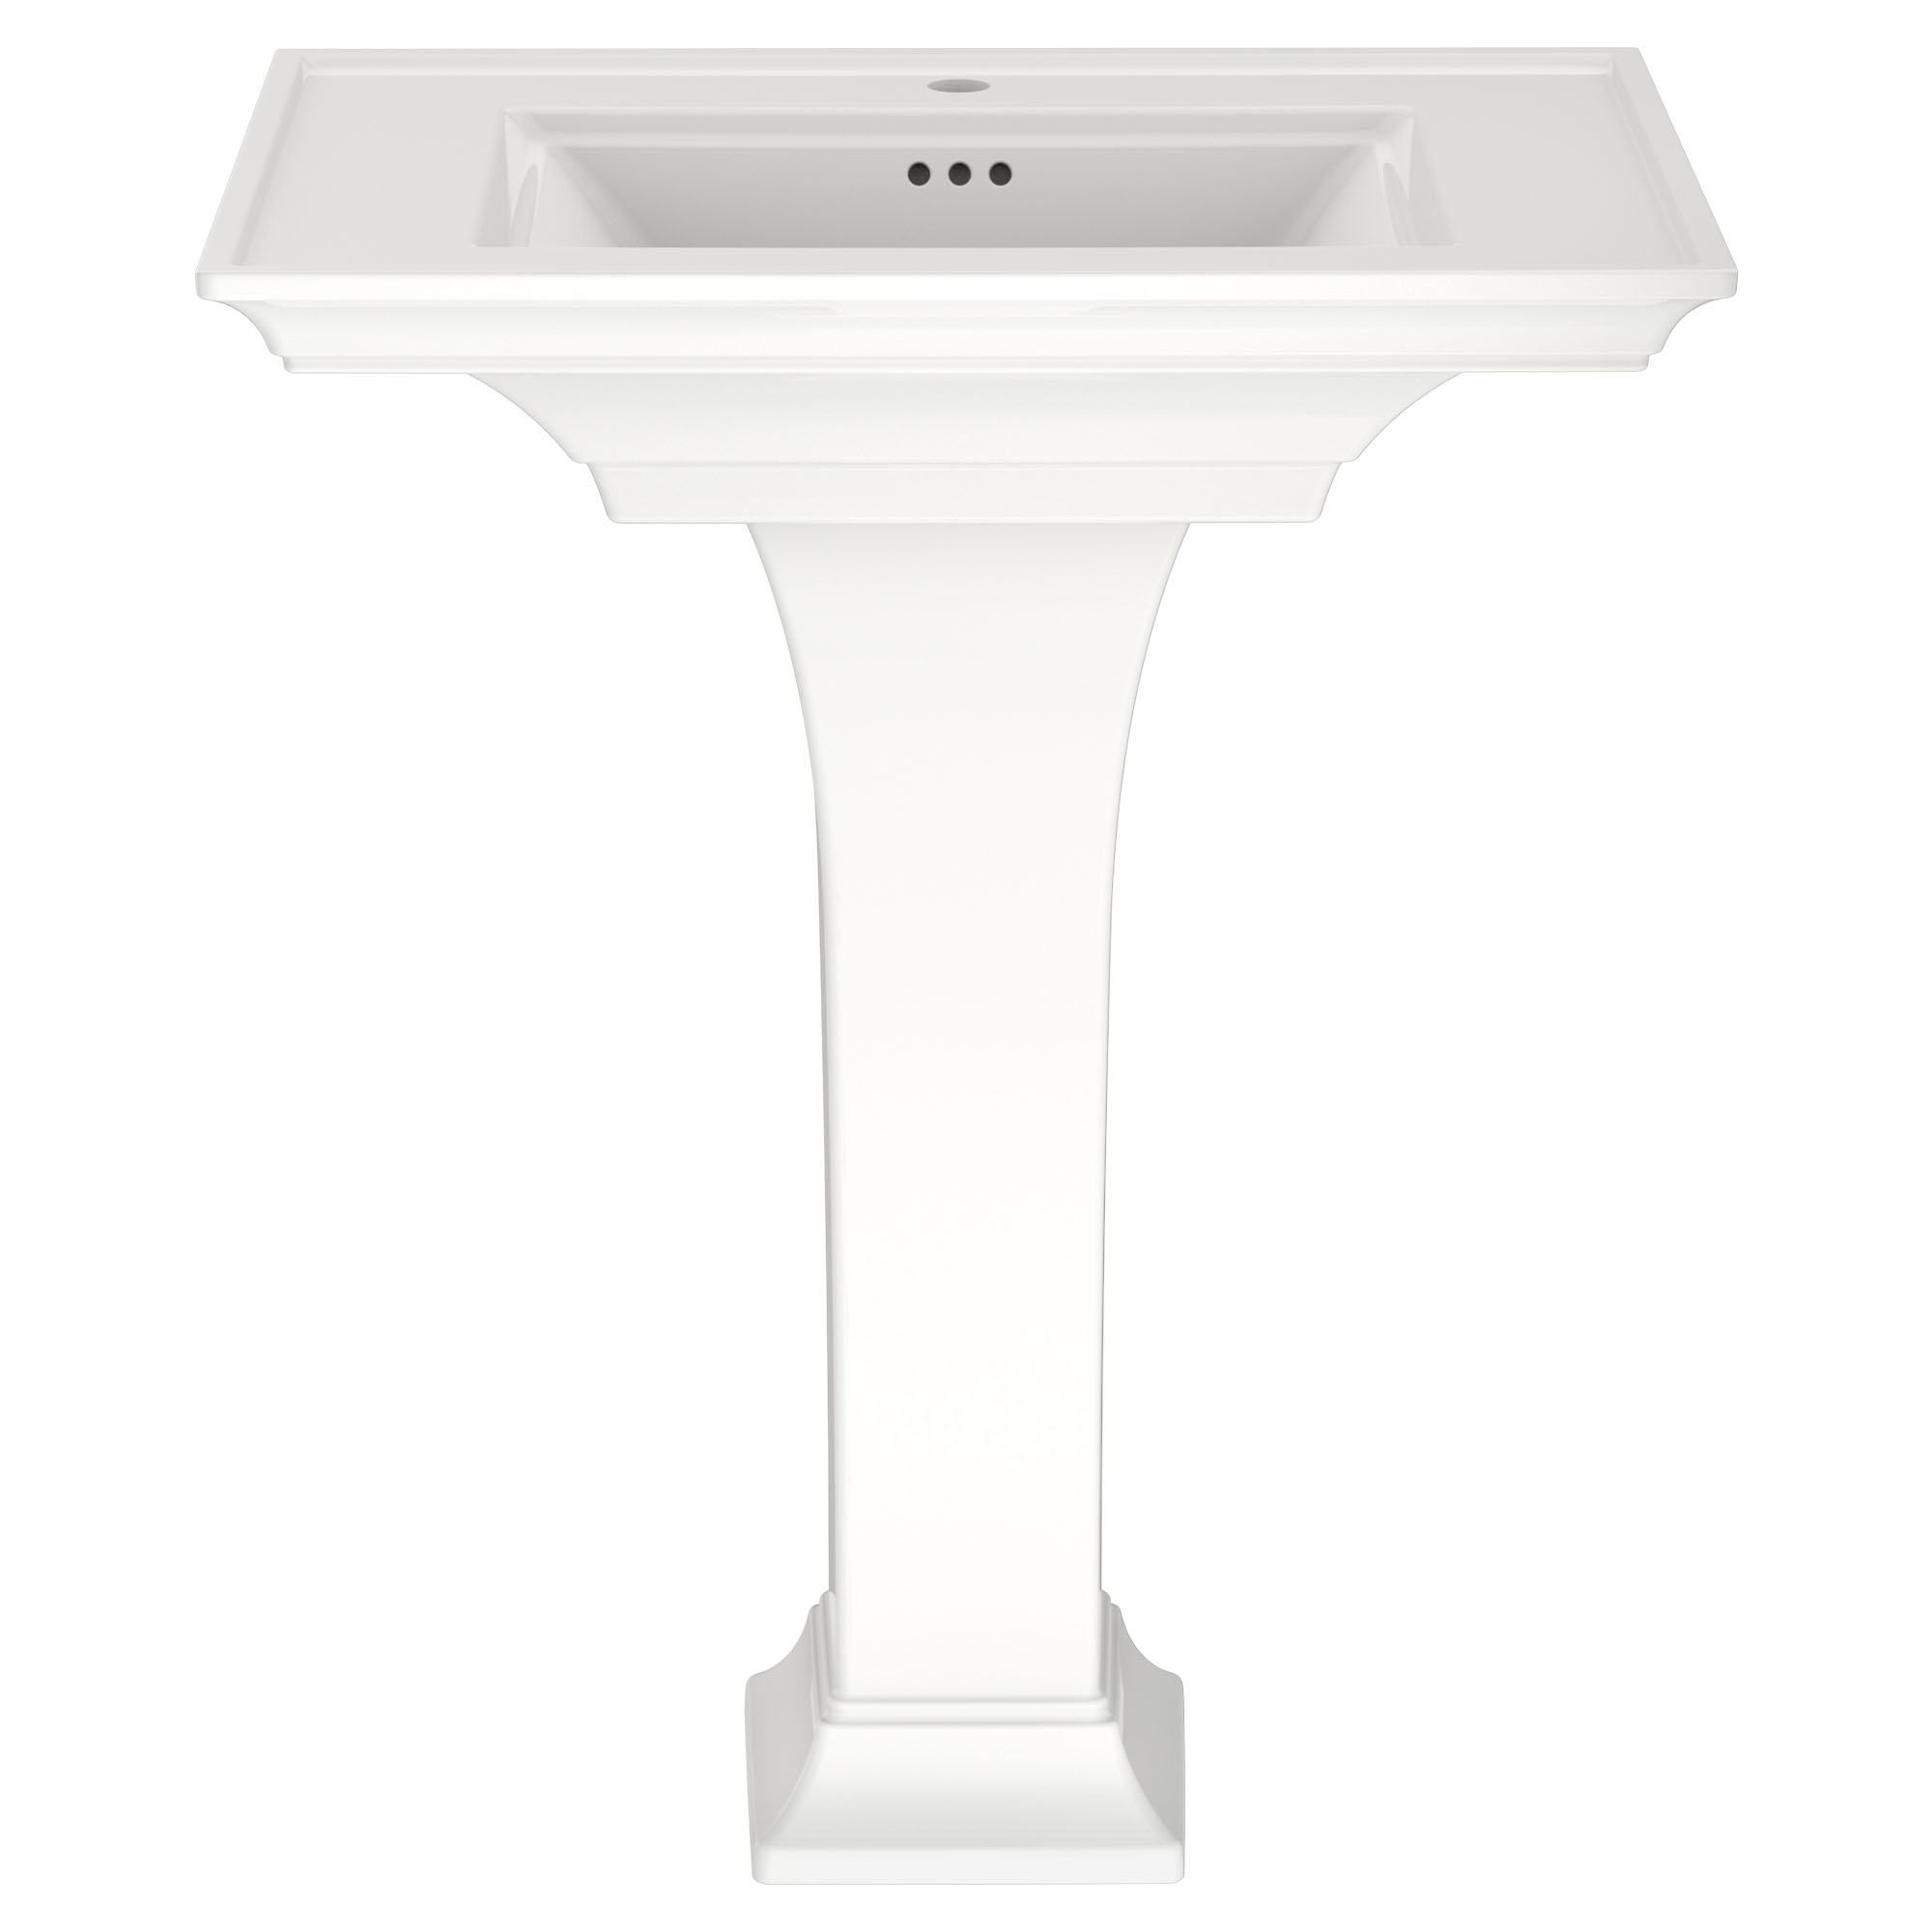 Town Square™ S Center Hole Only Pedestal Sink Top and Leg Combination